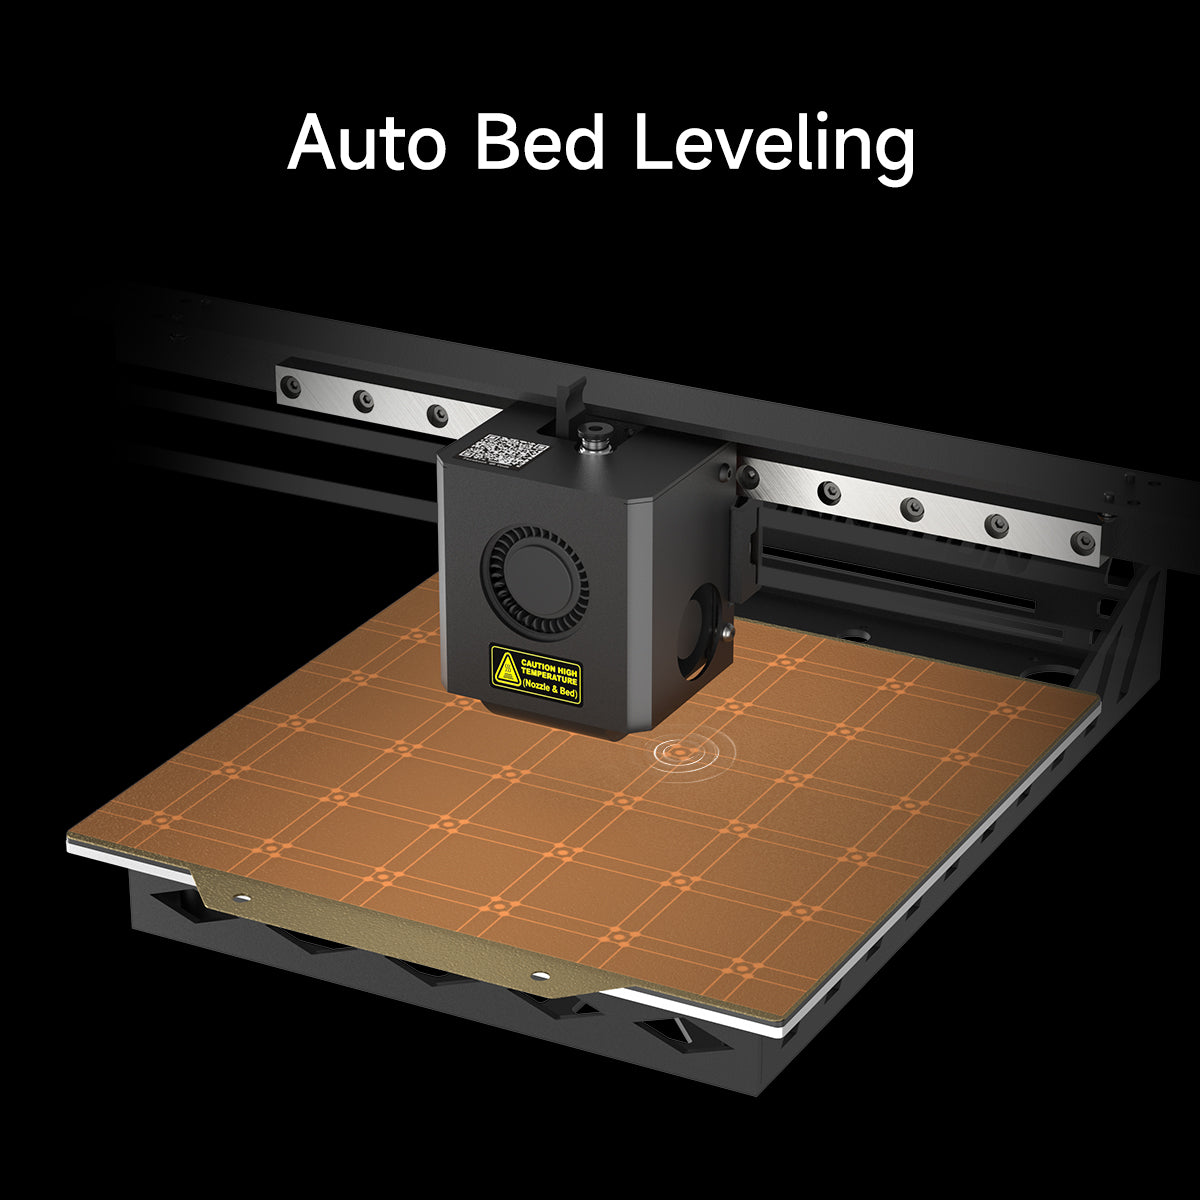 Auto bed leveling